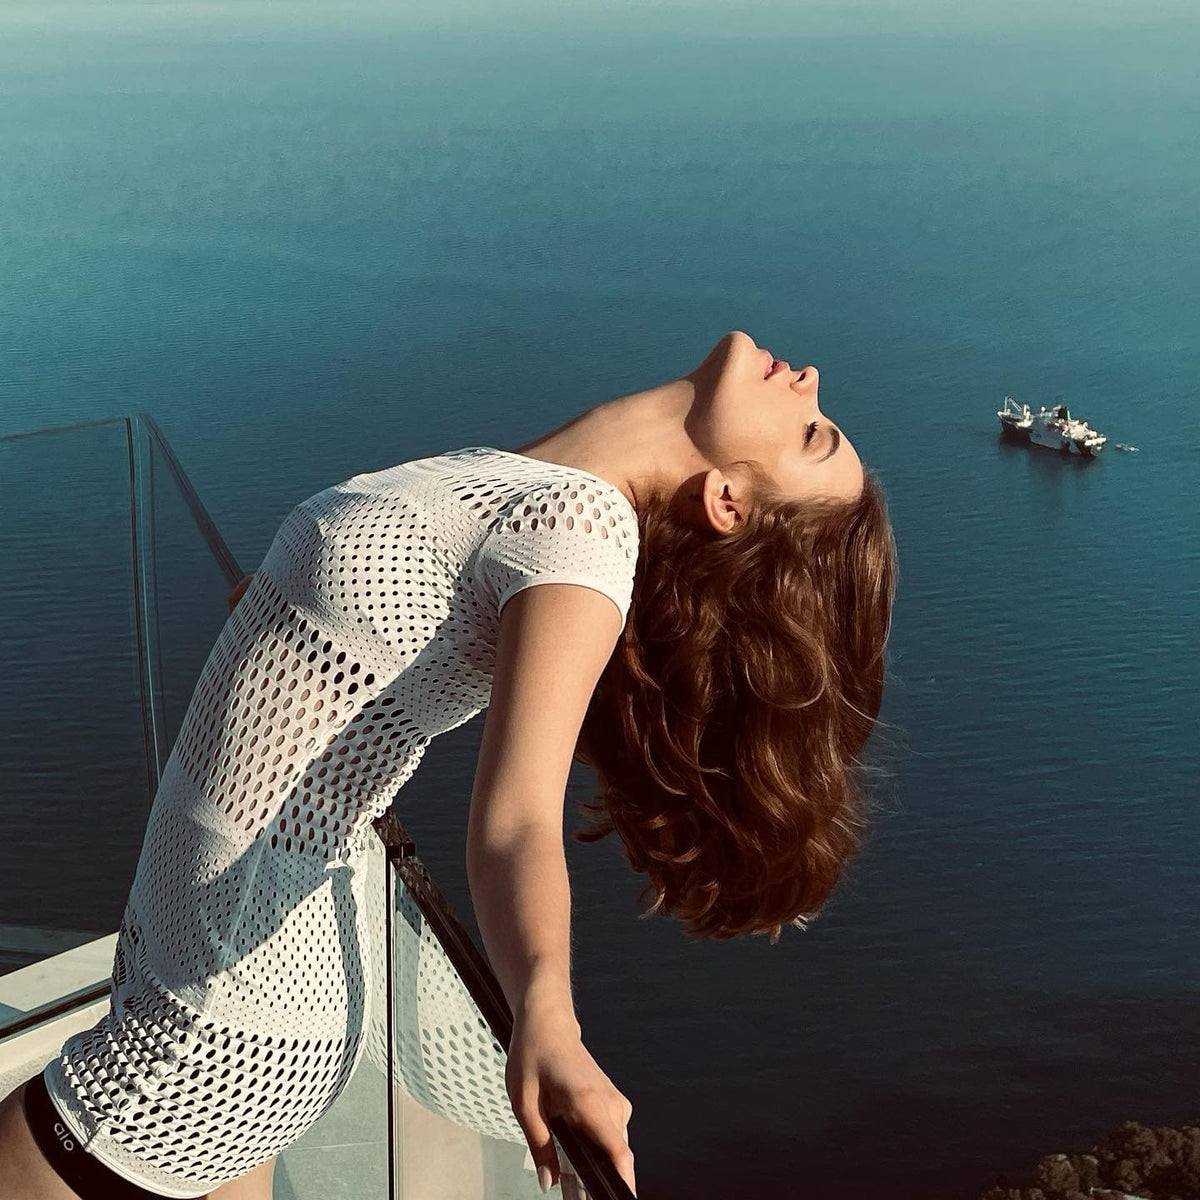 @realbarbarapalvin wearing a Mesh Haute Summer Dress in White while leaning over a balcony overlooking a large body of water. 